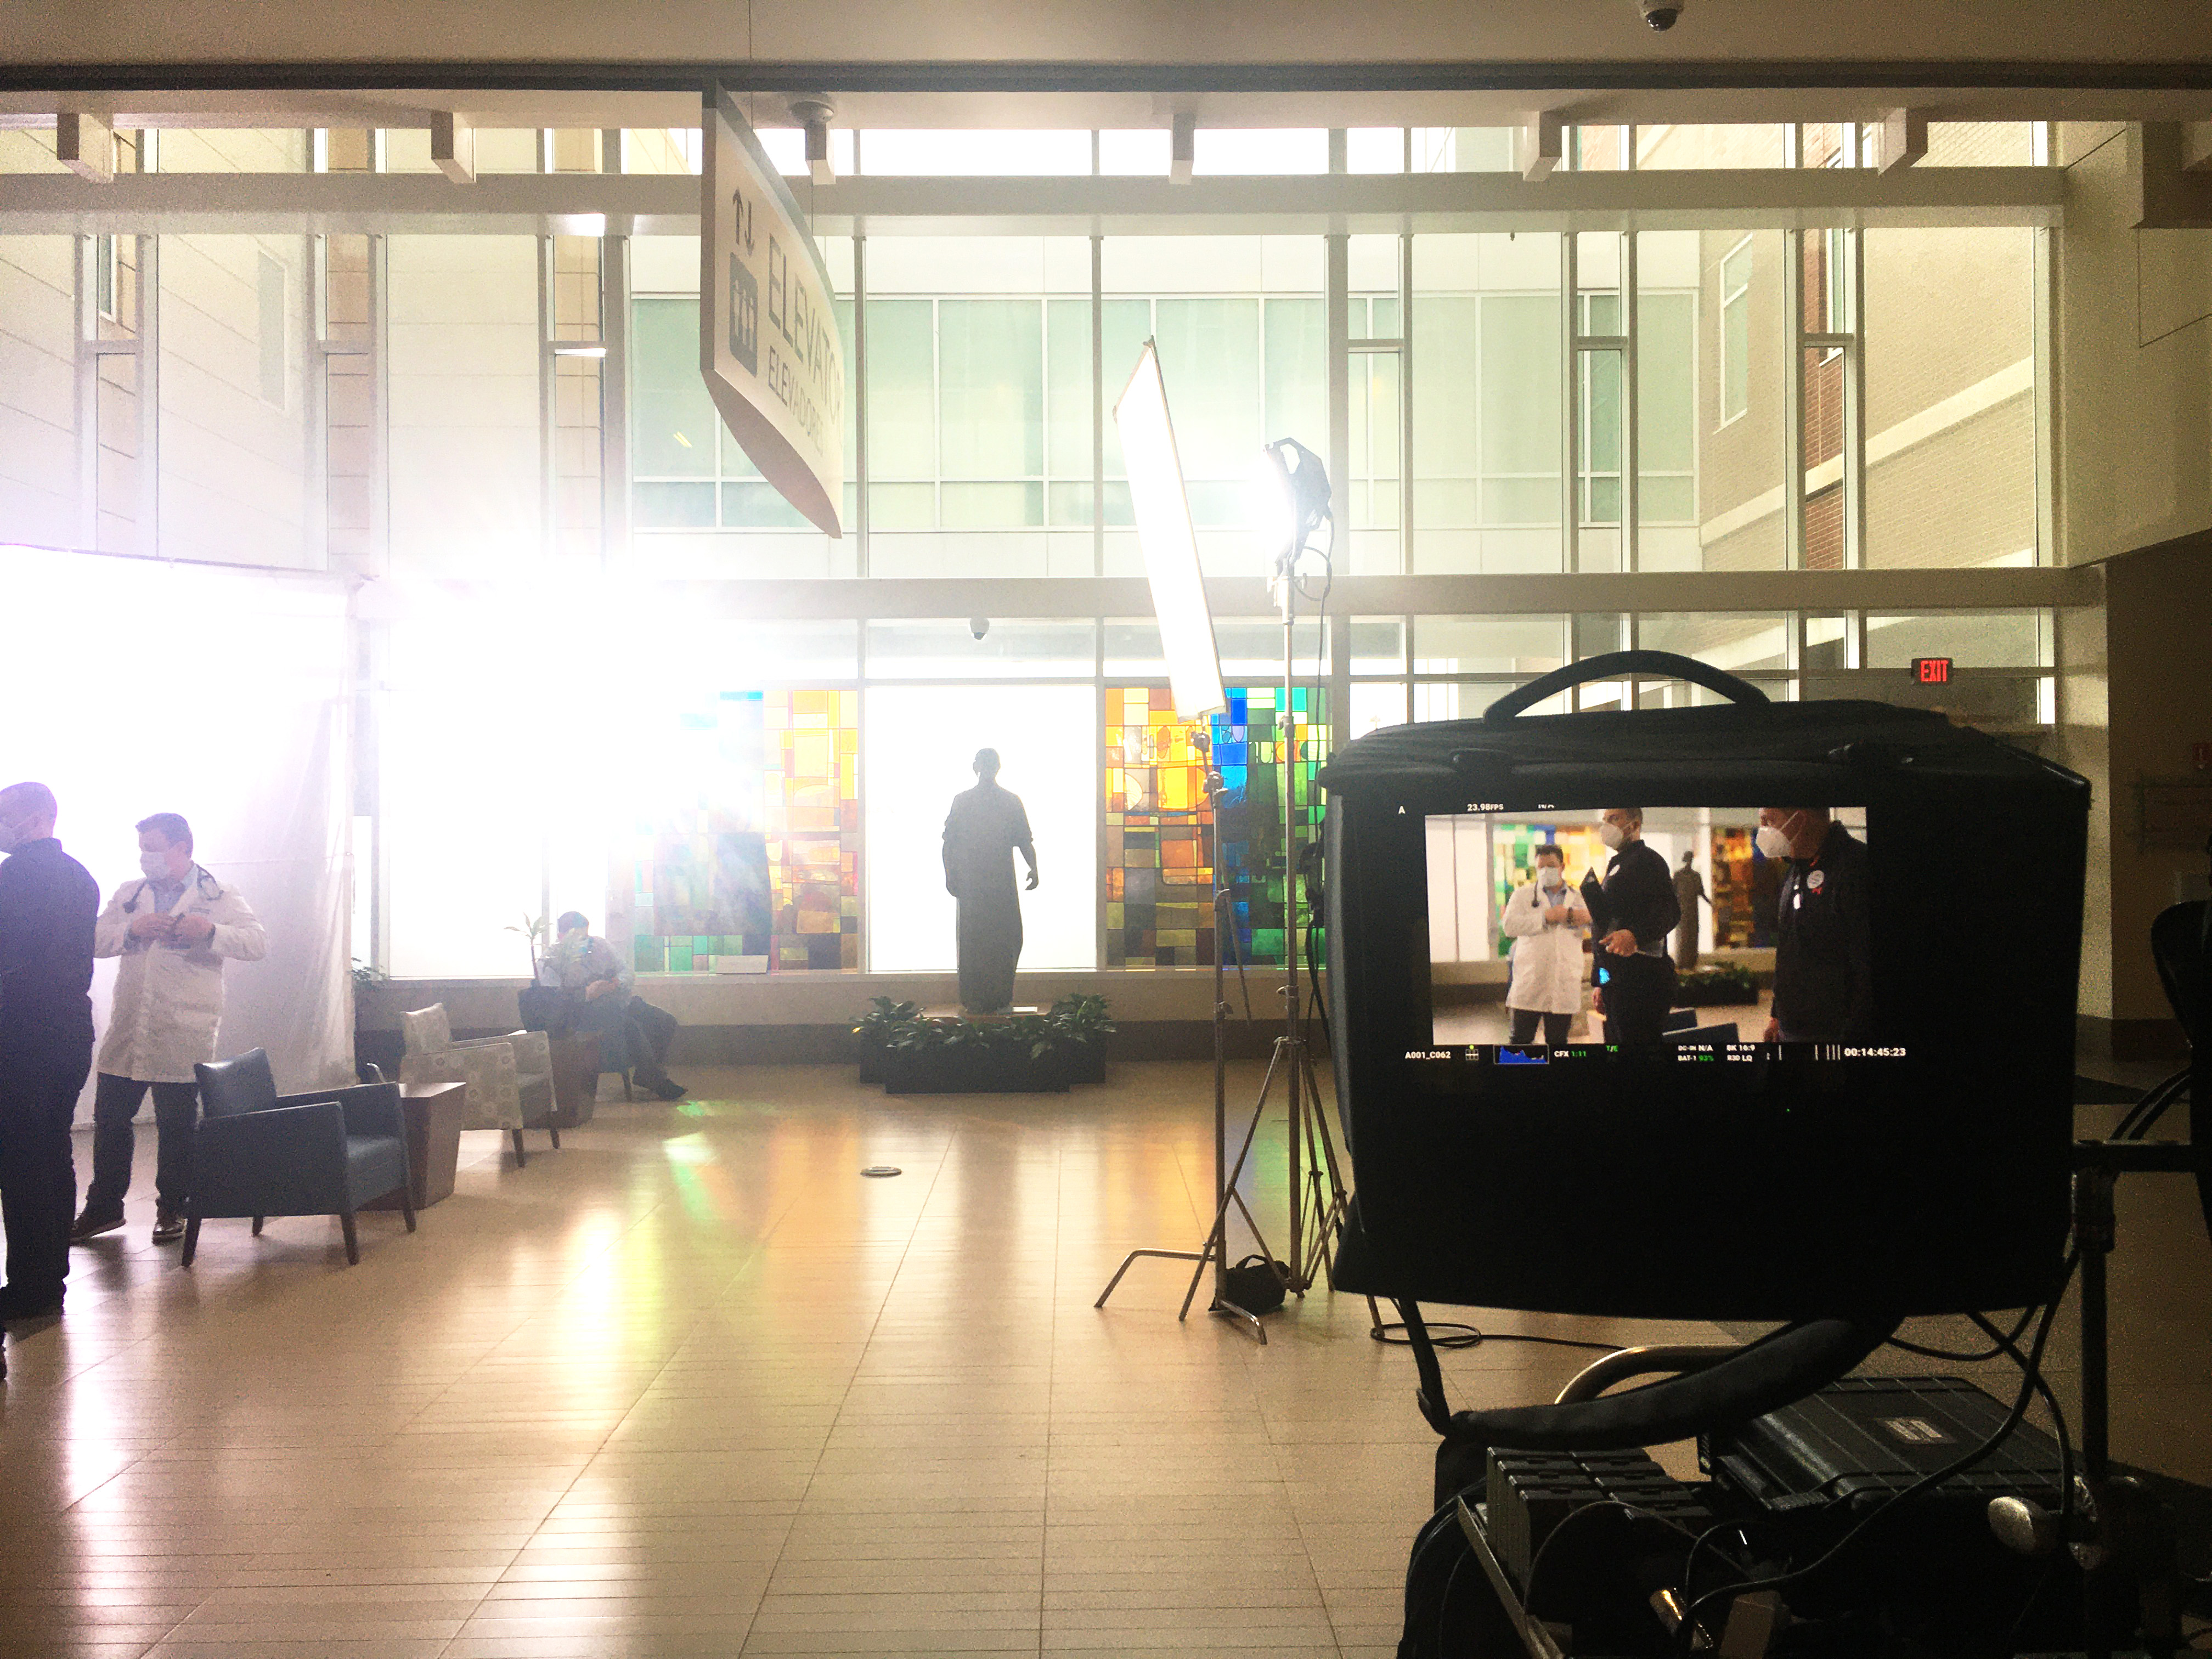 St. Joseph Health System - behind the scenes video shoot